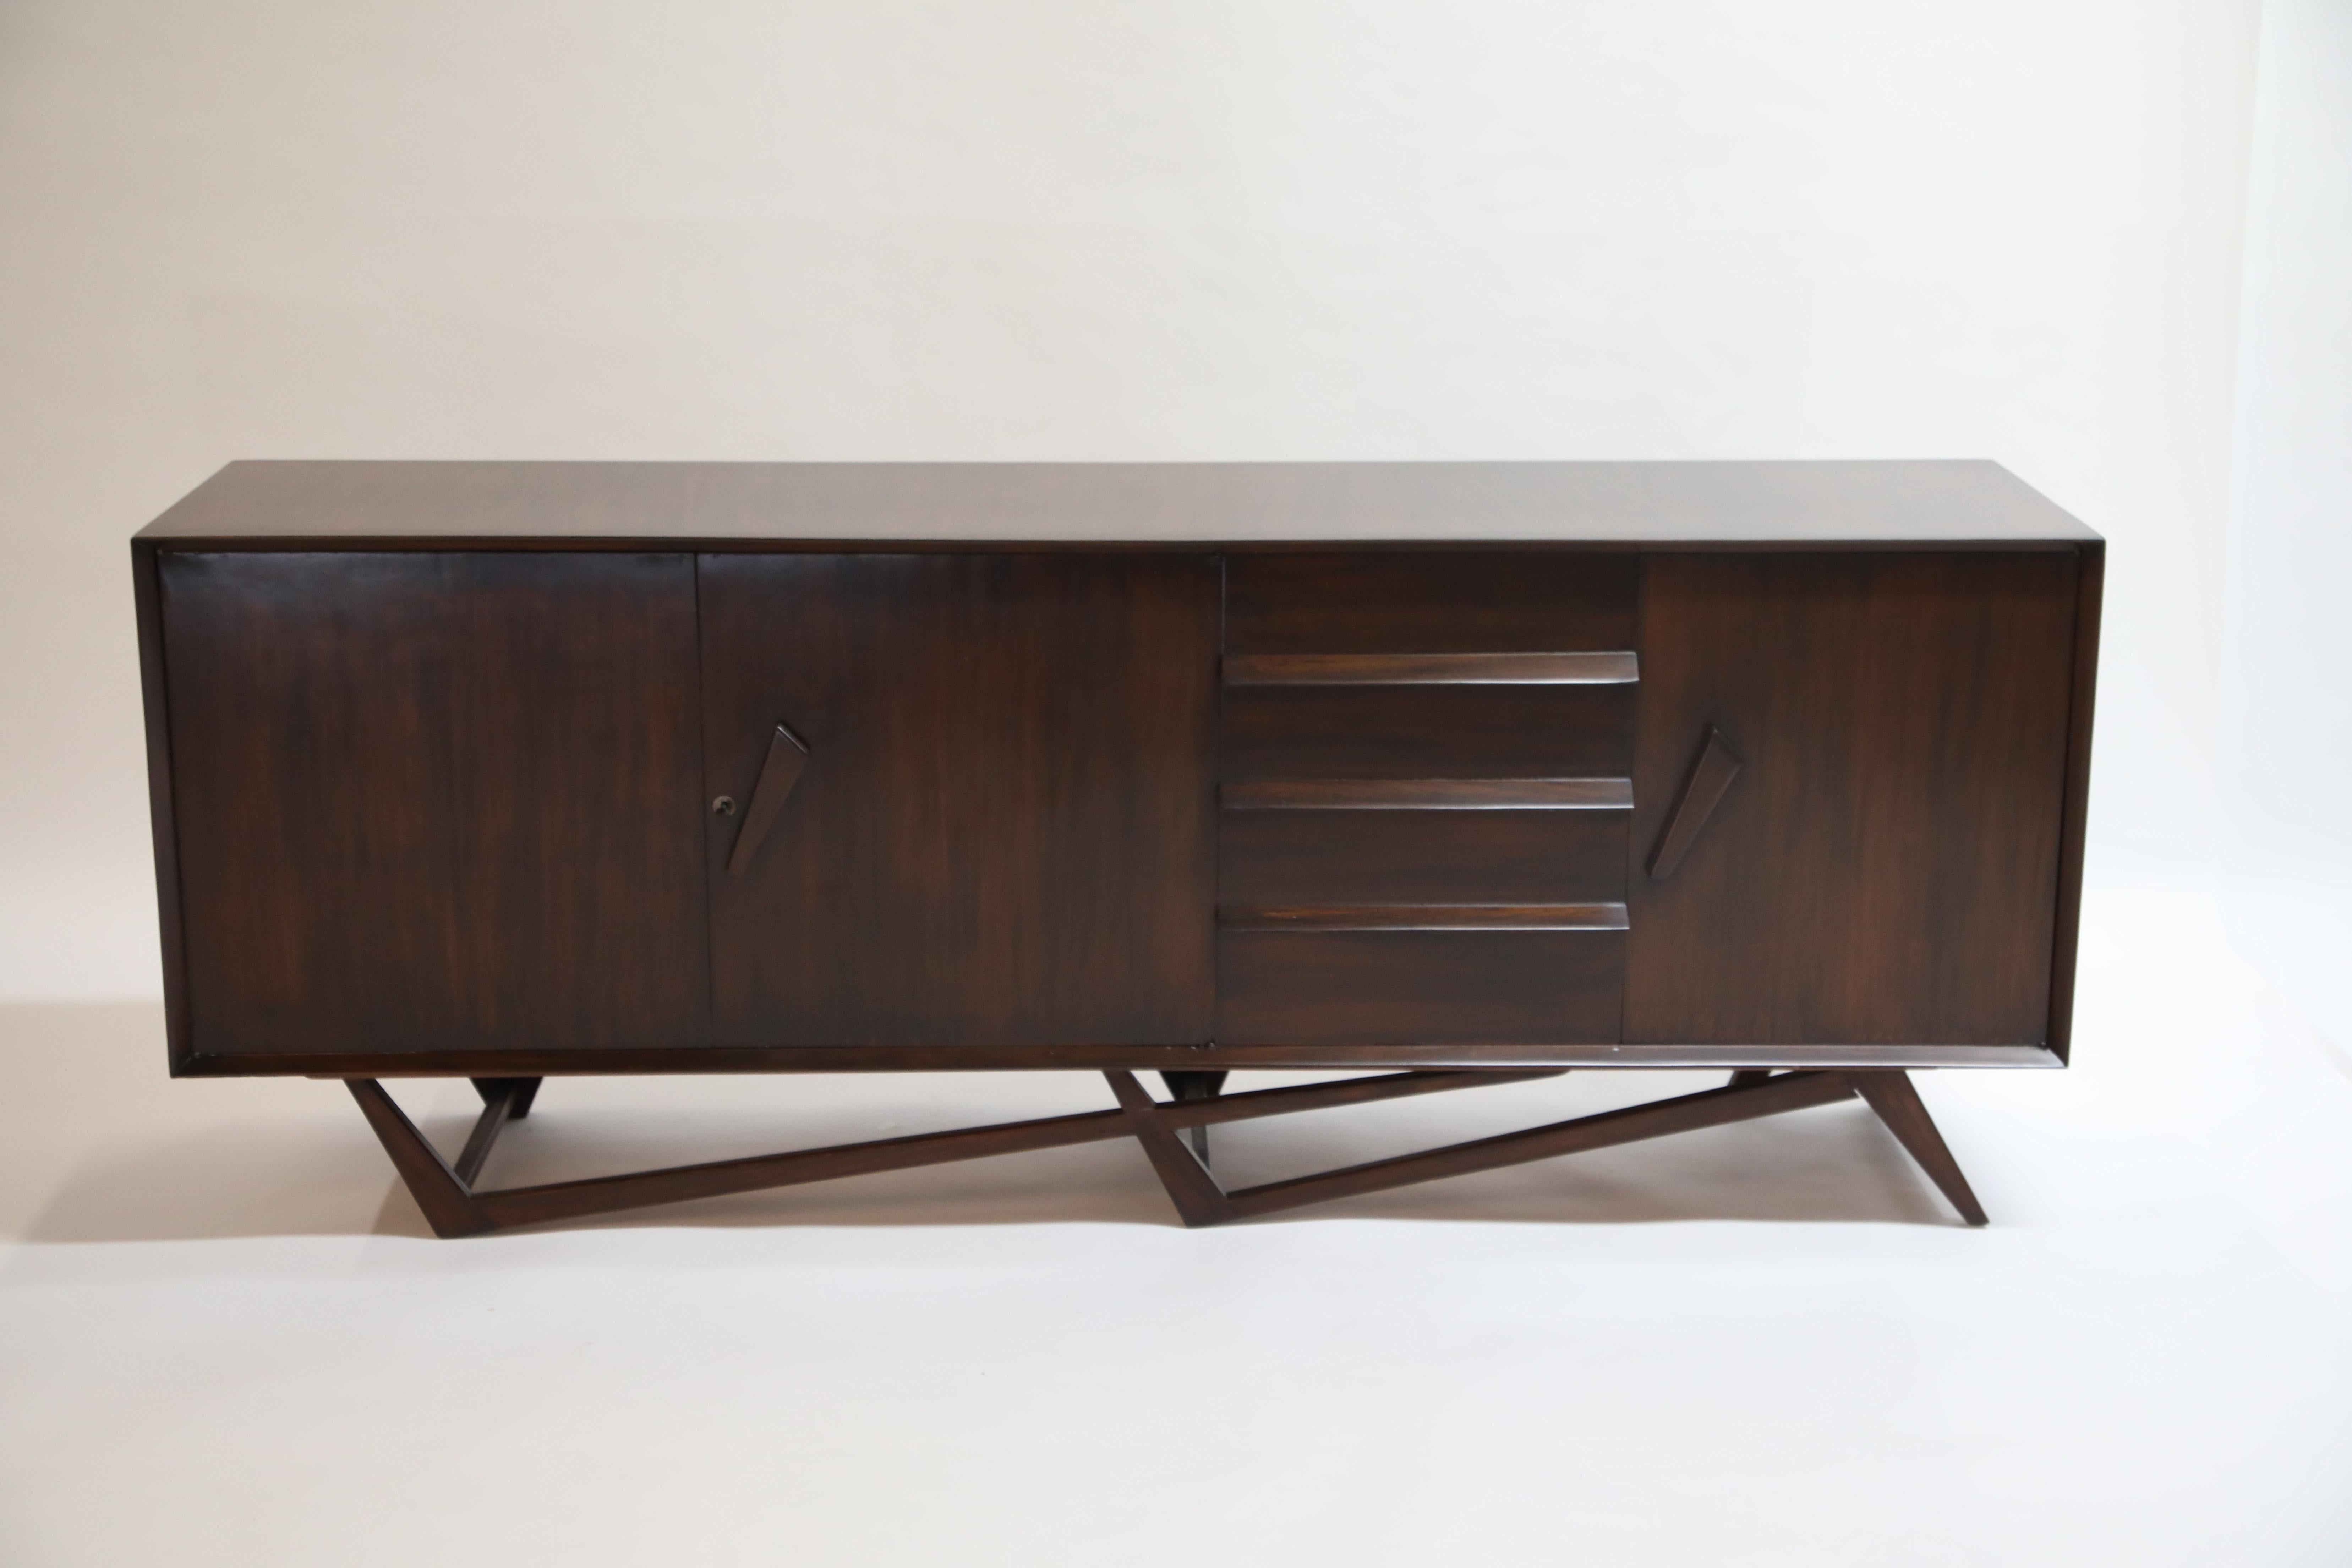 A breathtaking Giuseppe Scapinelli architectural sideboard, crafted in 1950s, Brazil. This incredible sideboard credenza, fabricated in a deep Brazilian Rosewood, sits atop a dual boomerang floating base. Wonderful googie styled handles open two